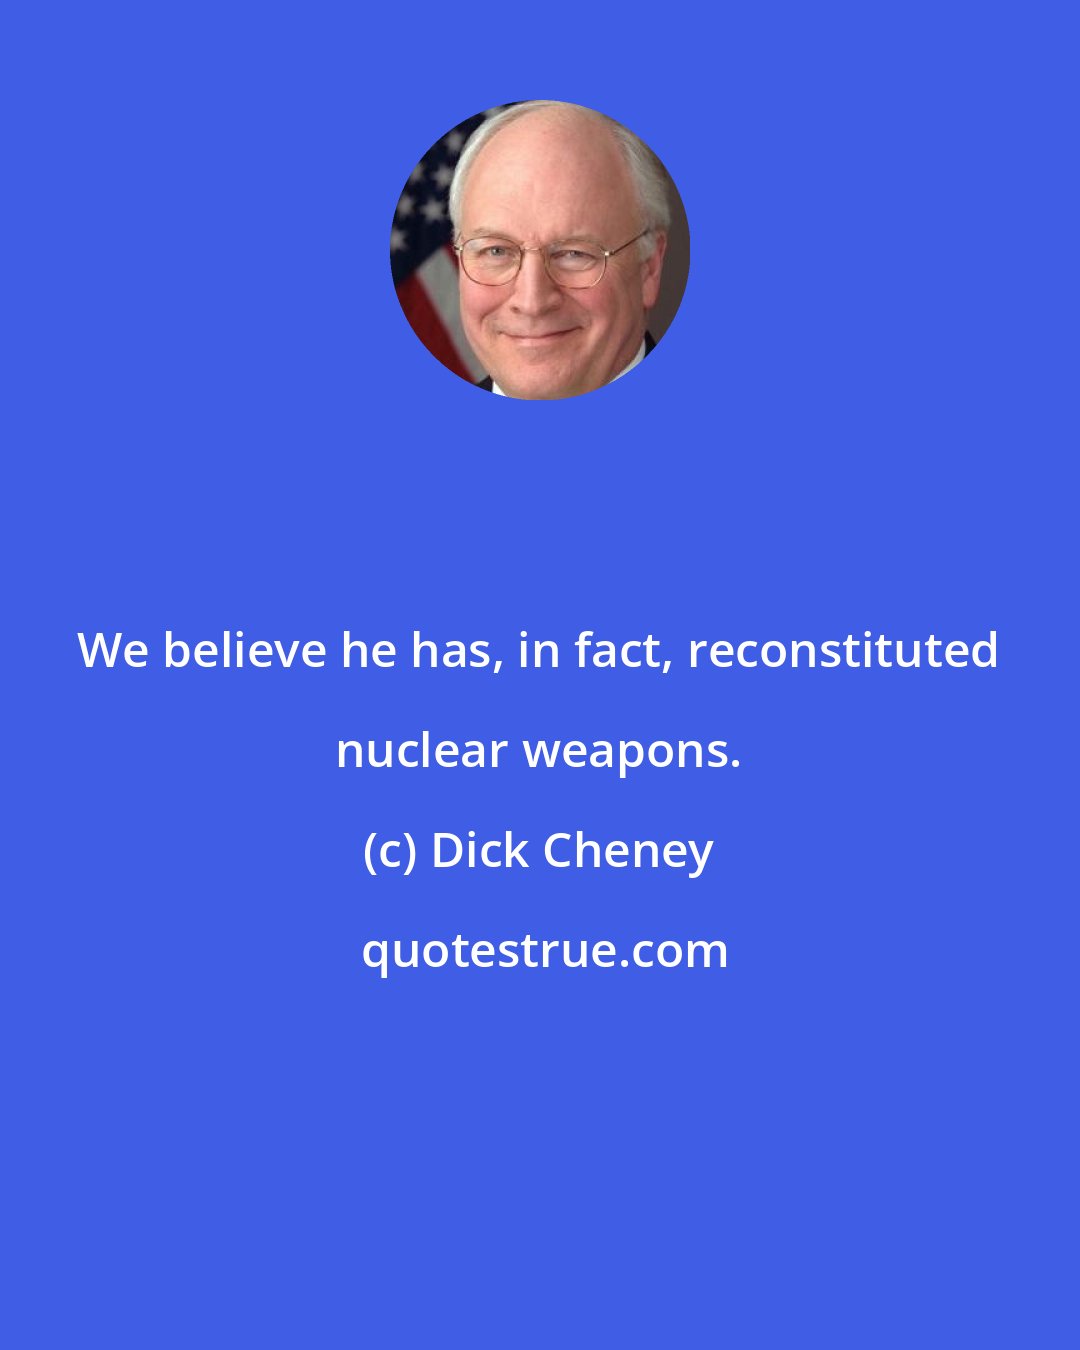 Dick Cheney: We believe he has, in fact, reconstituted nuclear weapons.